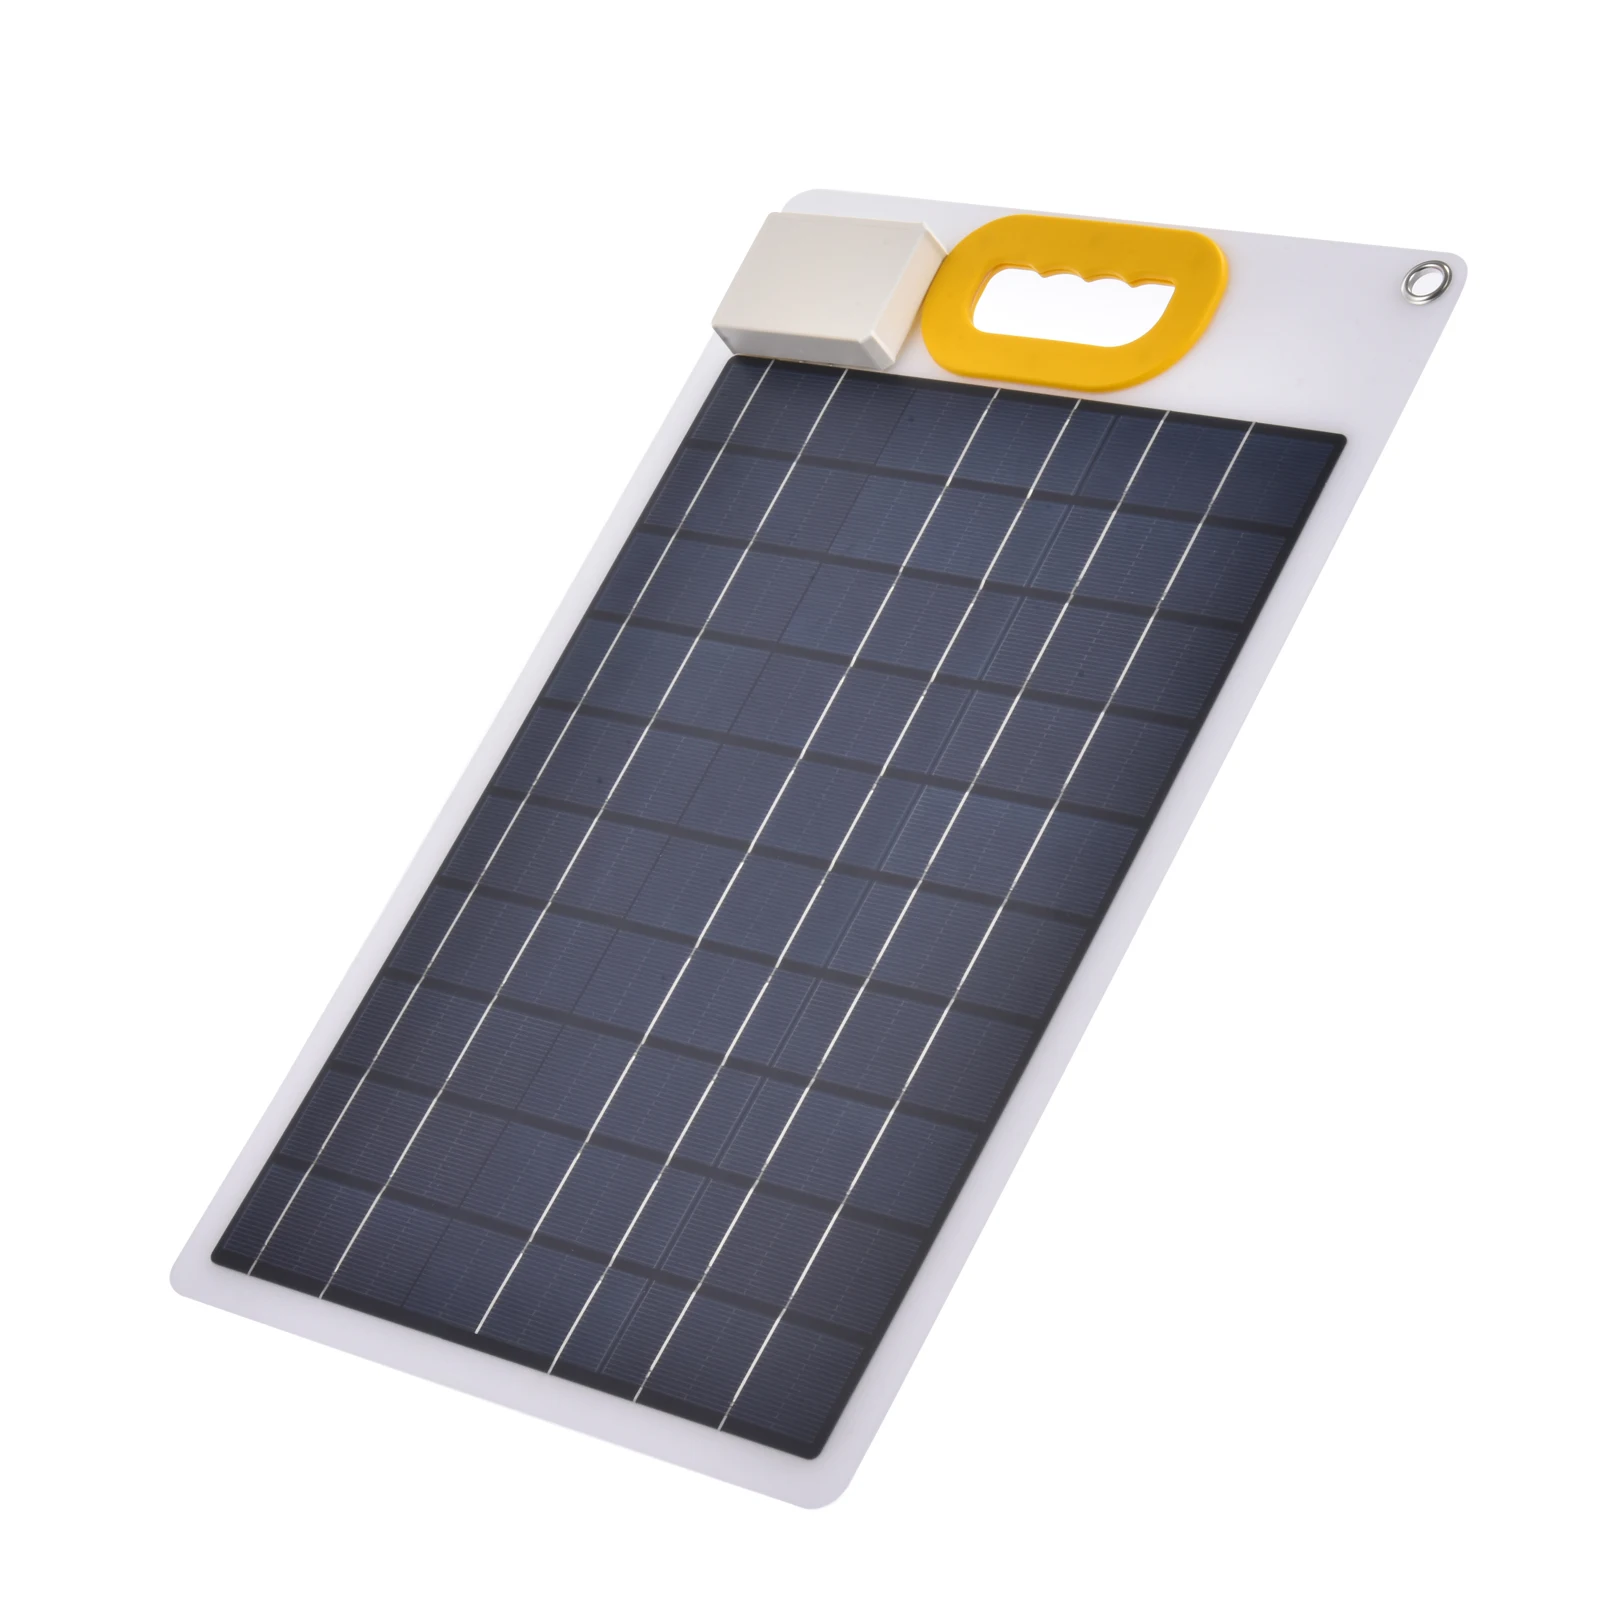 

30W Solar Cells Charger SunPower Charger 2 USB Ports & 1 USB C Portable Solar Panel Charging For Smartphones Ideal For Travel